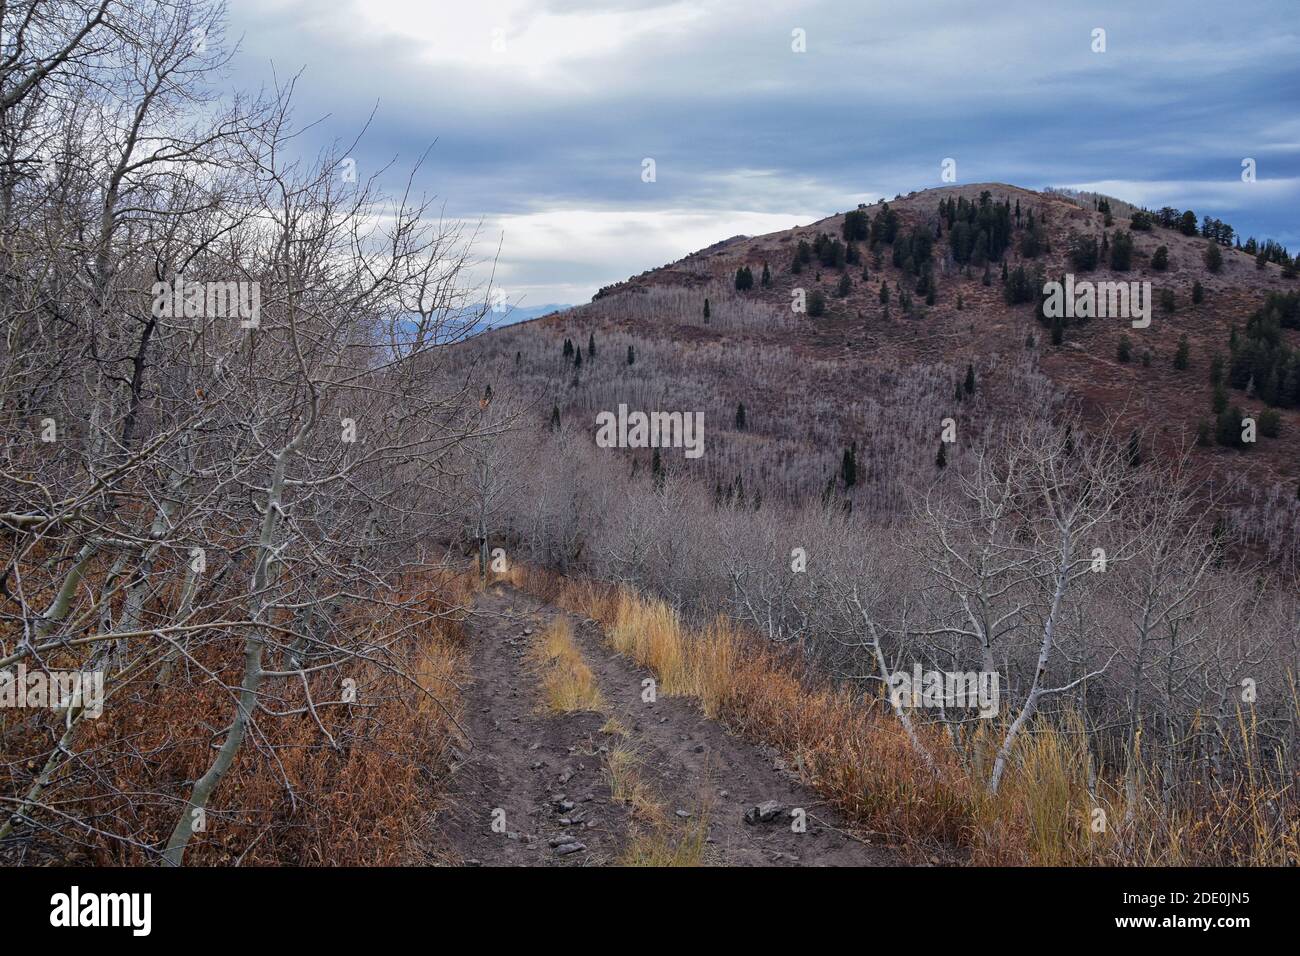 Provo Peak hiking trail mountain landscape scenic view, towards Slide Canyon, Slate Canyon Rock Canyon and Squaw Peak Road, Wasatch Rocky mountain Ran Stock Photo